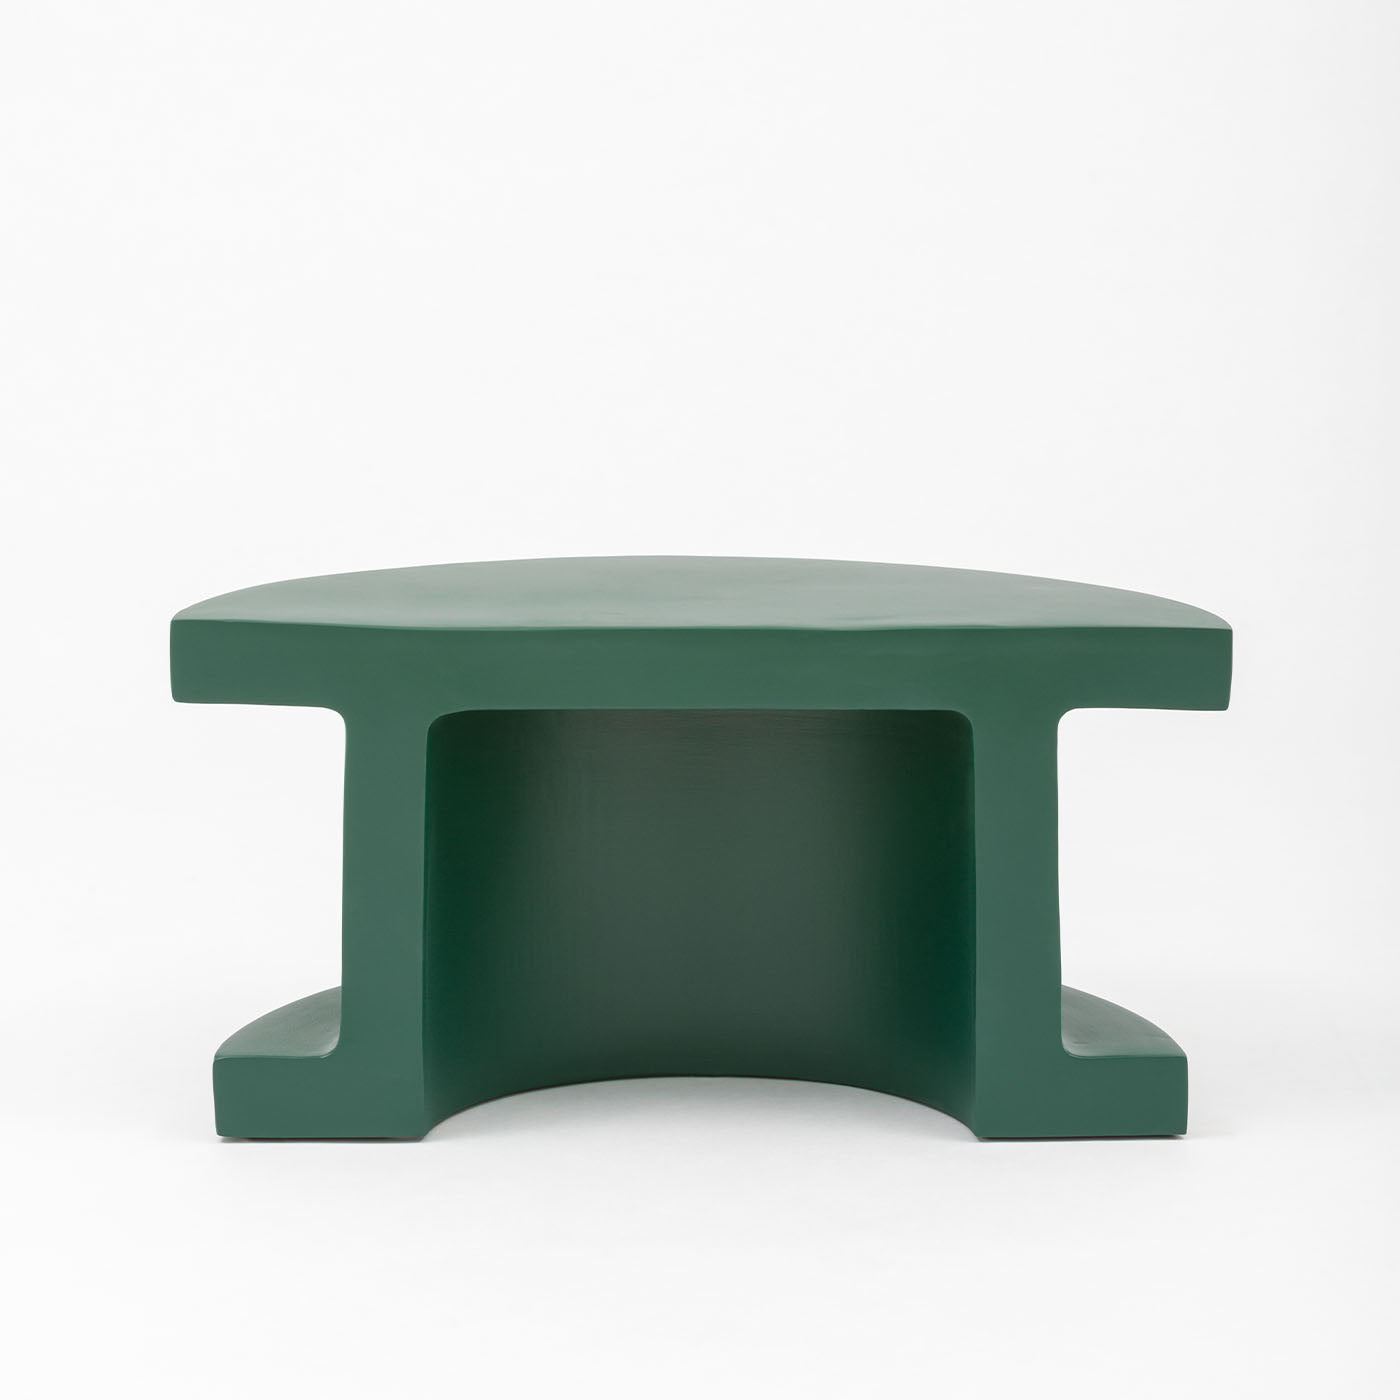 Slice Green Side Table - Alternative view 1